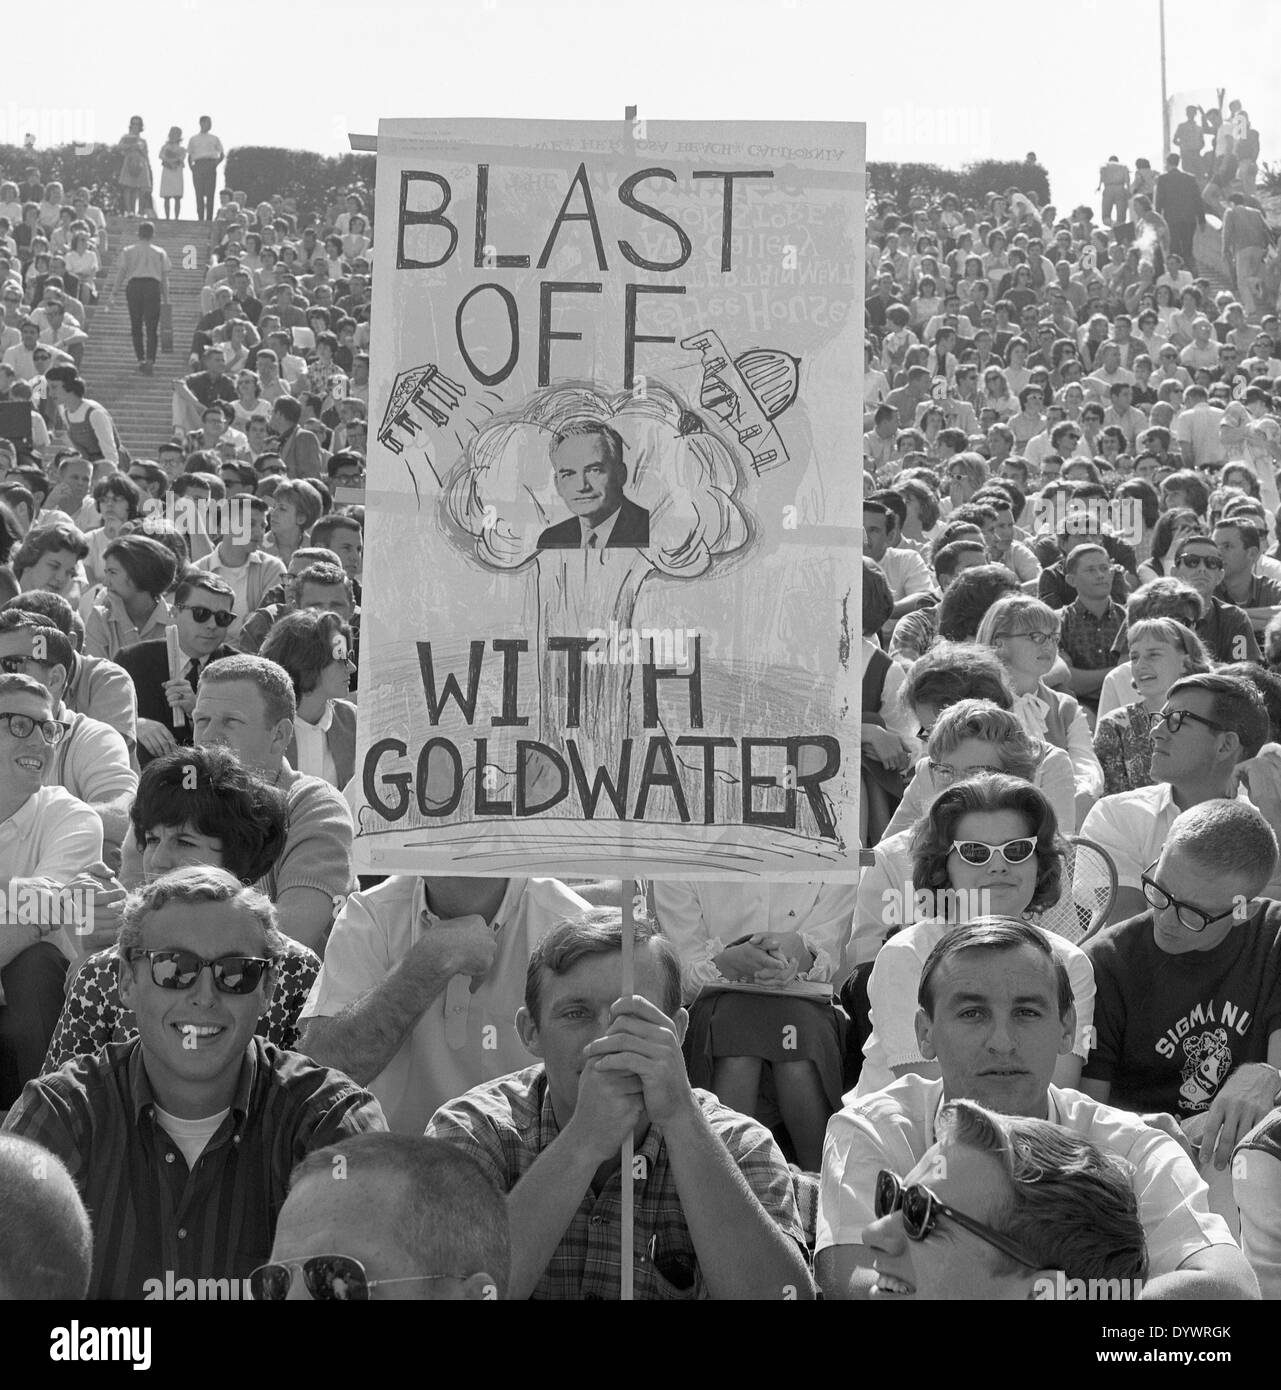 Crowd at a political rally for Senator Barry Goldwater in San Diego, California, USA in the early 1960s Stock Photo